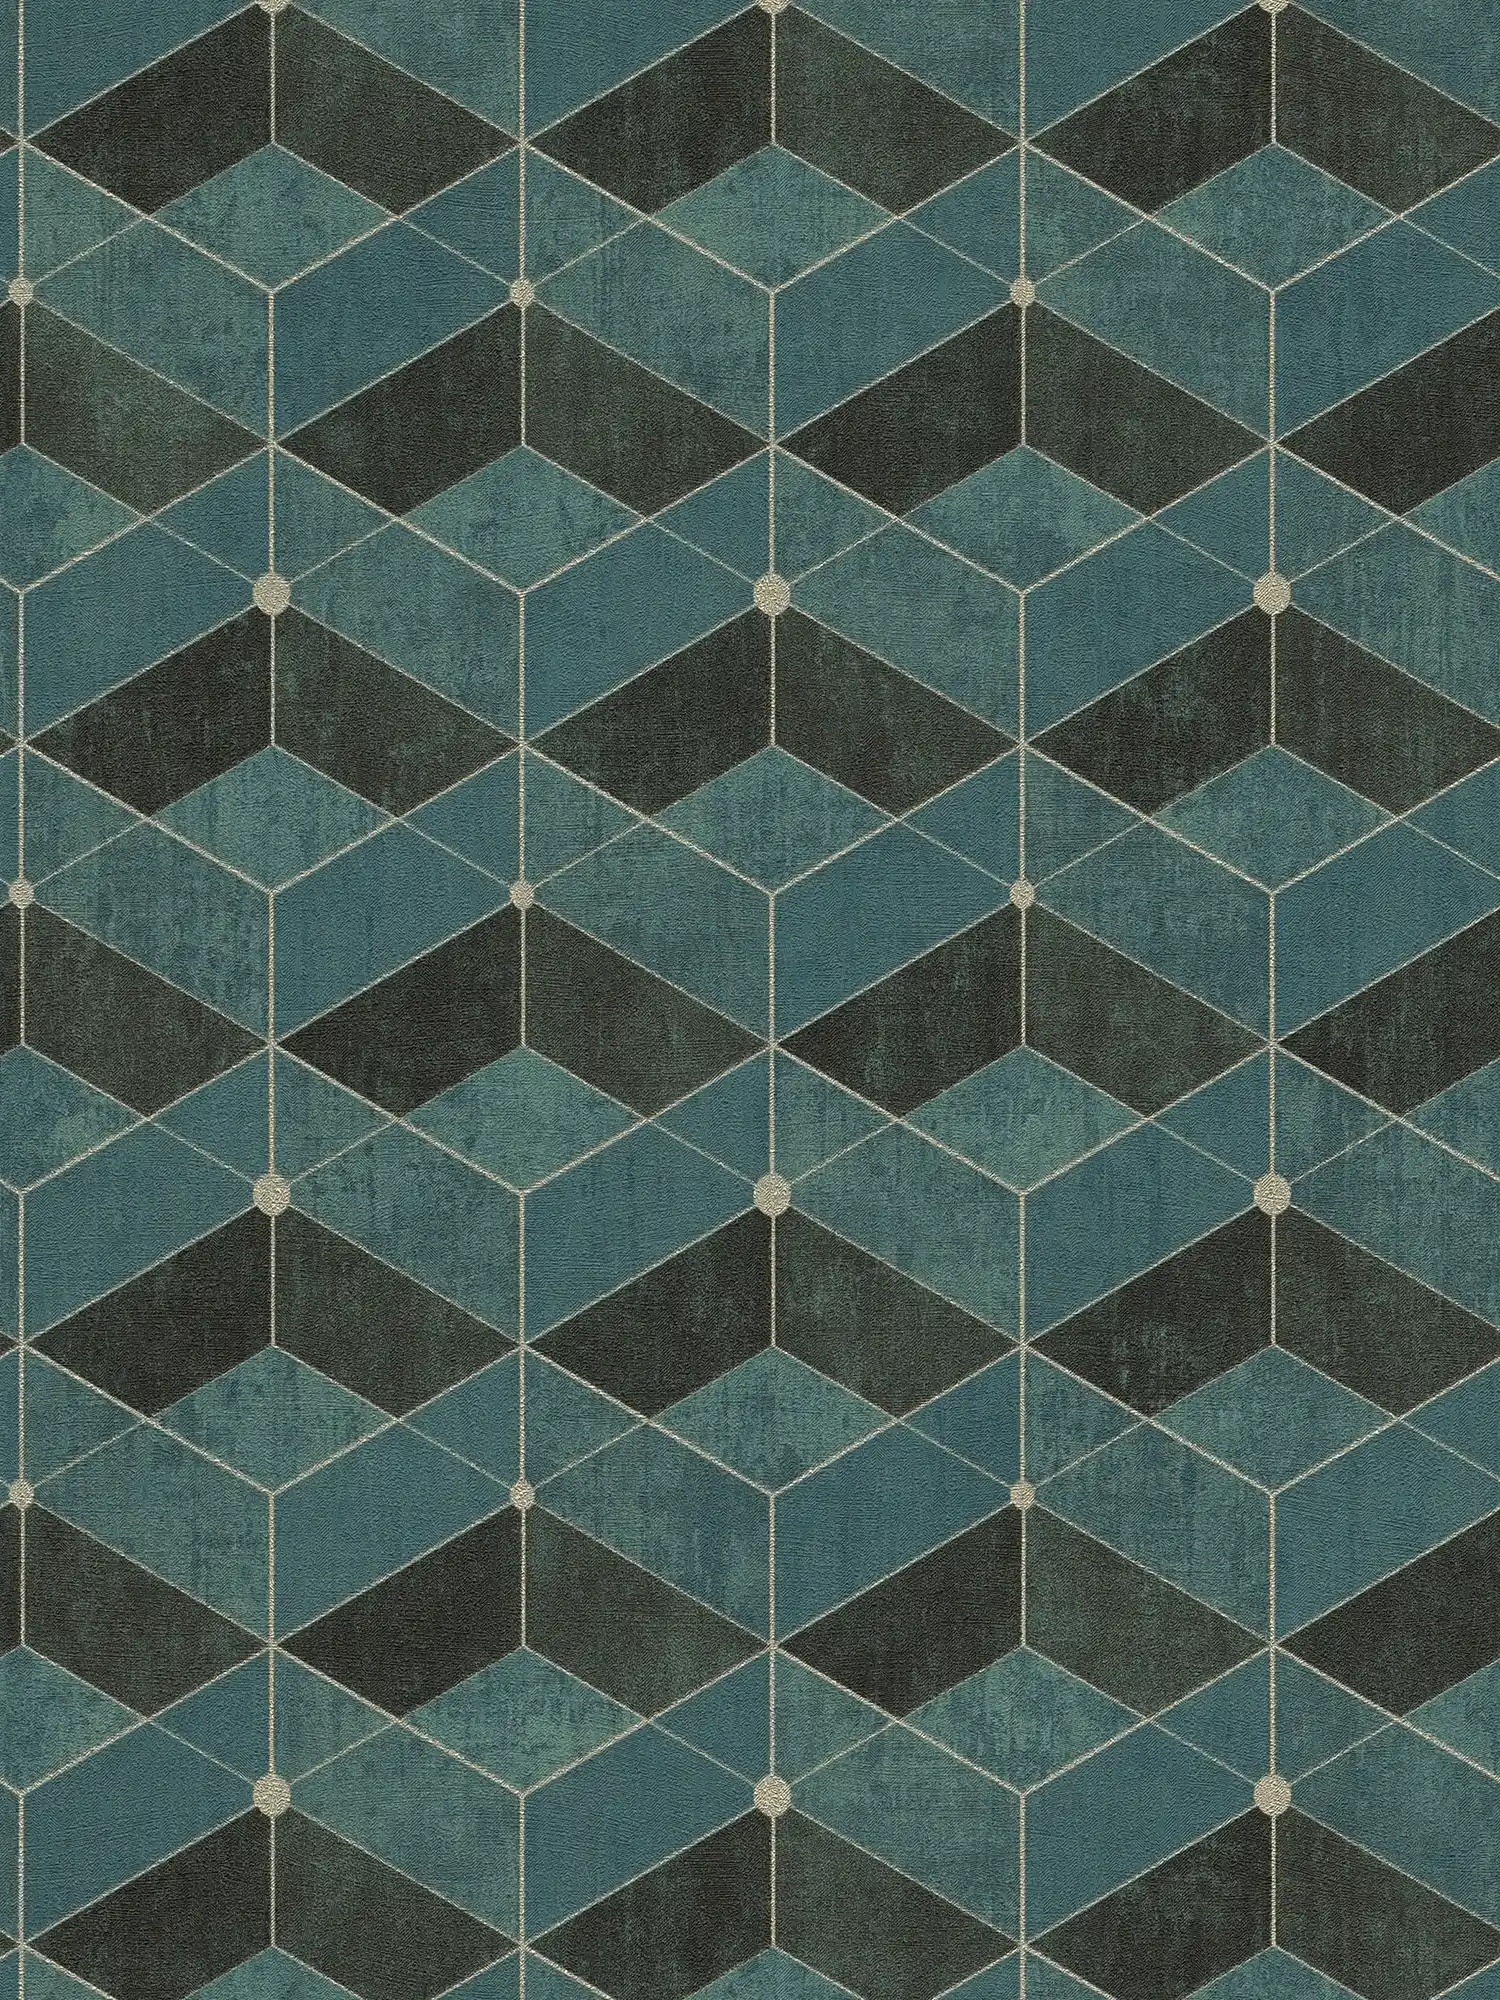 Petrol wallpaper with graphic pattern & metallic accent - blue, green, black
